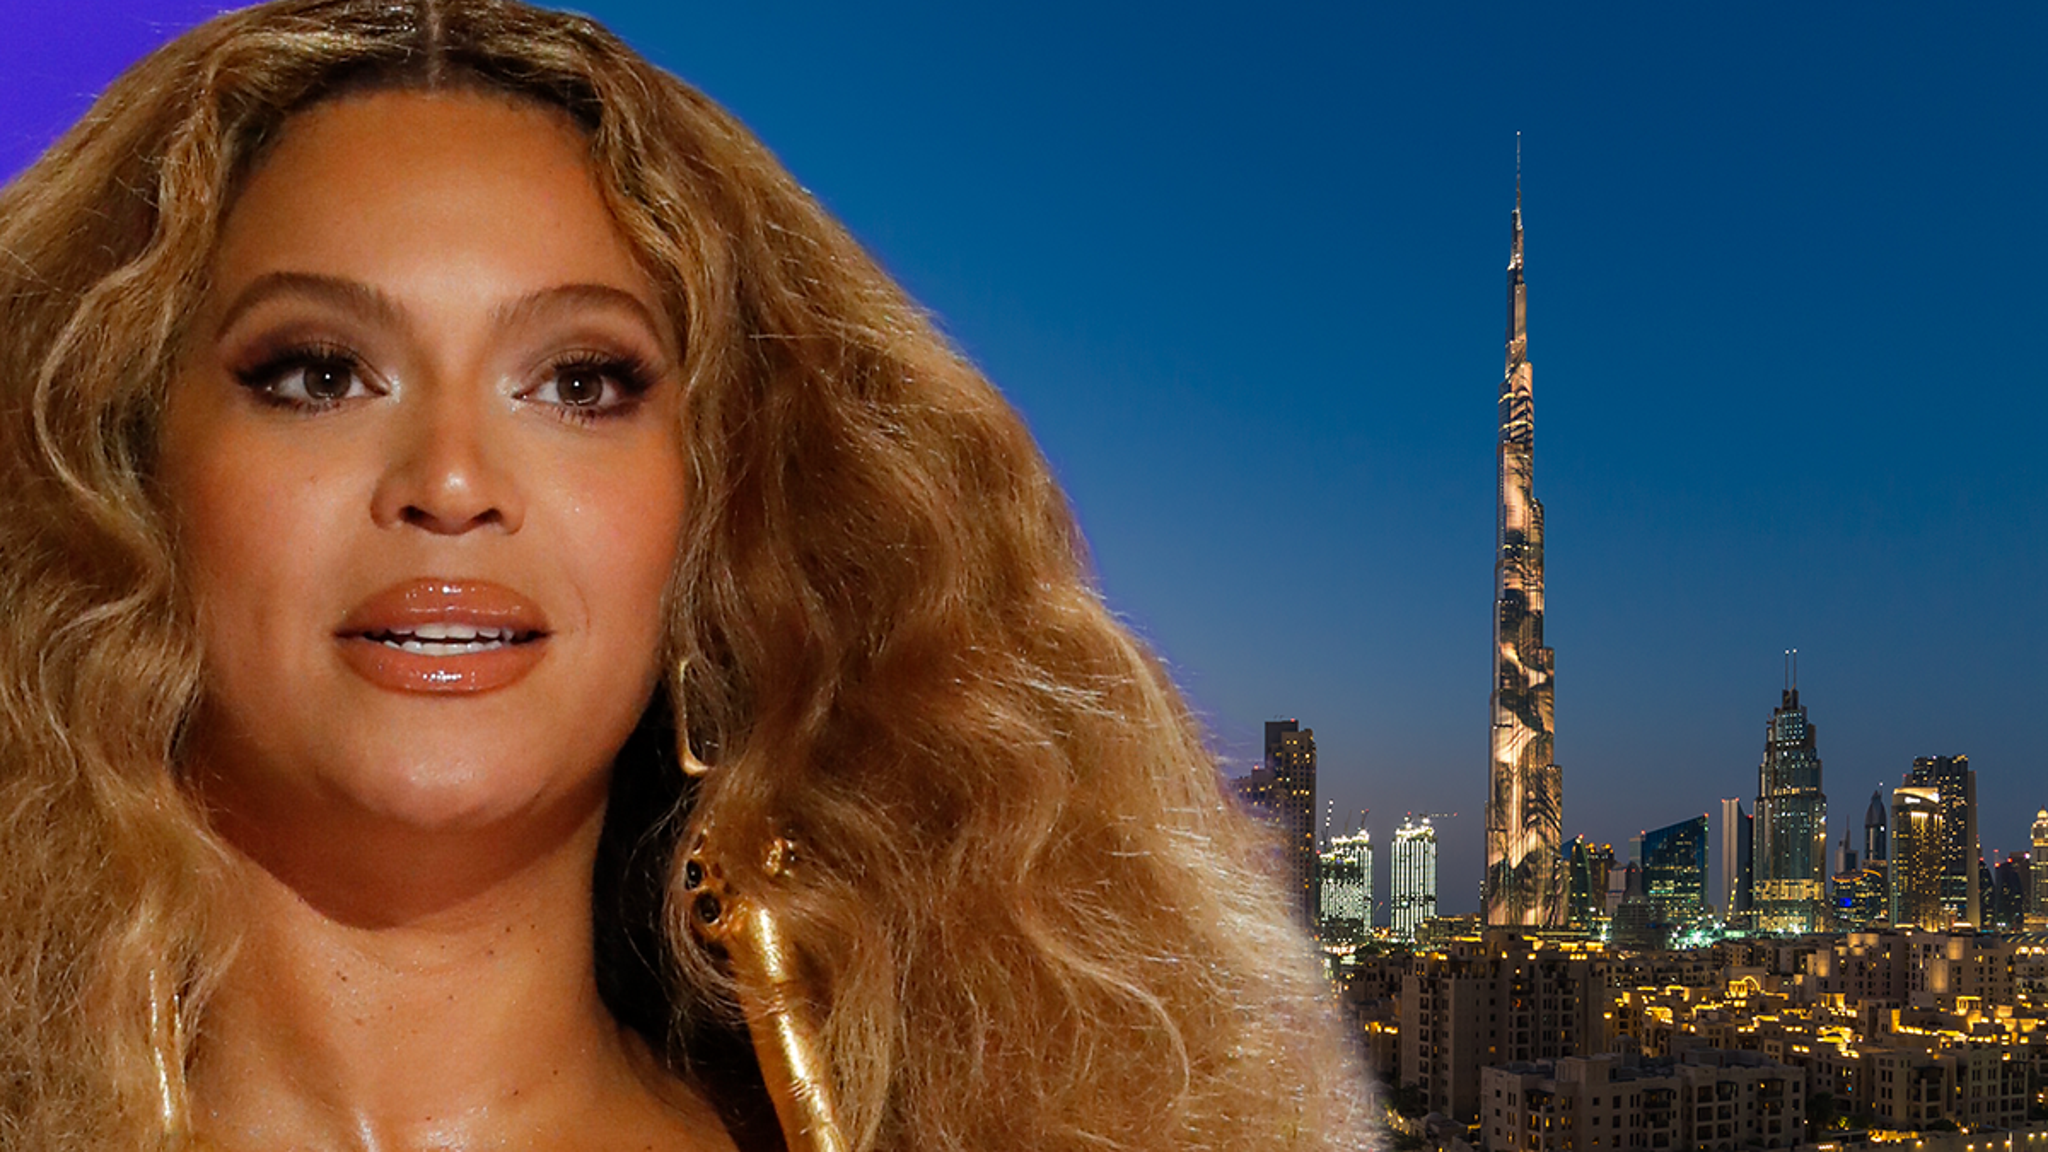 Beyoncé’s performance in Dubai was caught on camera despite strict guidelines